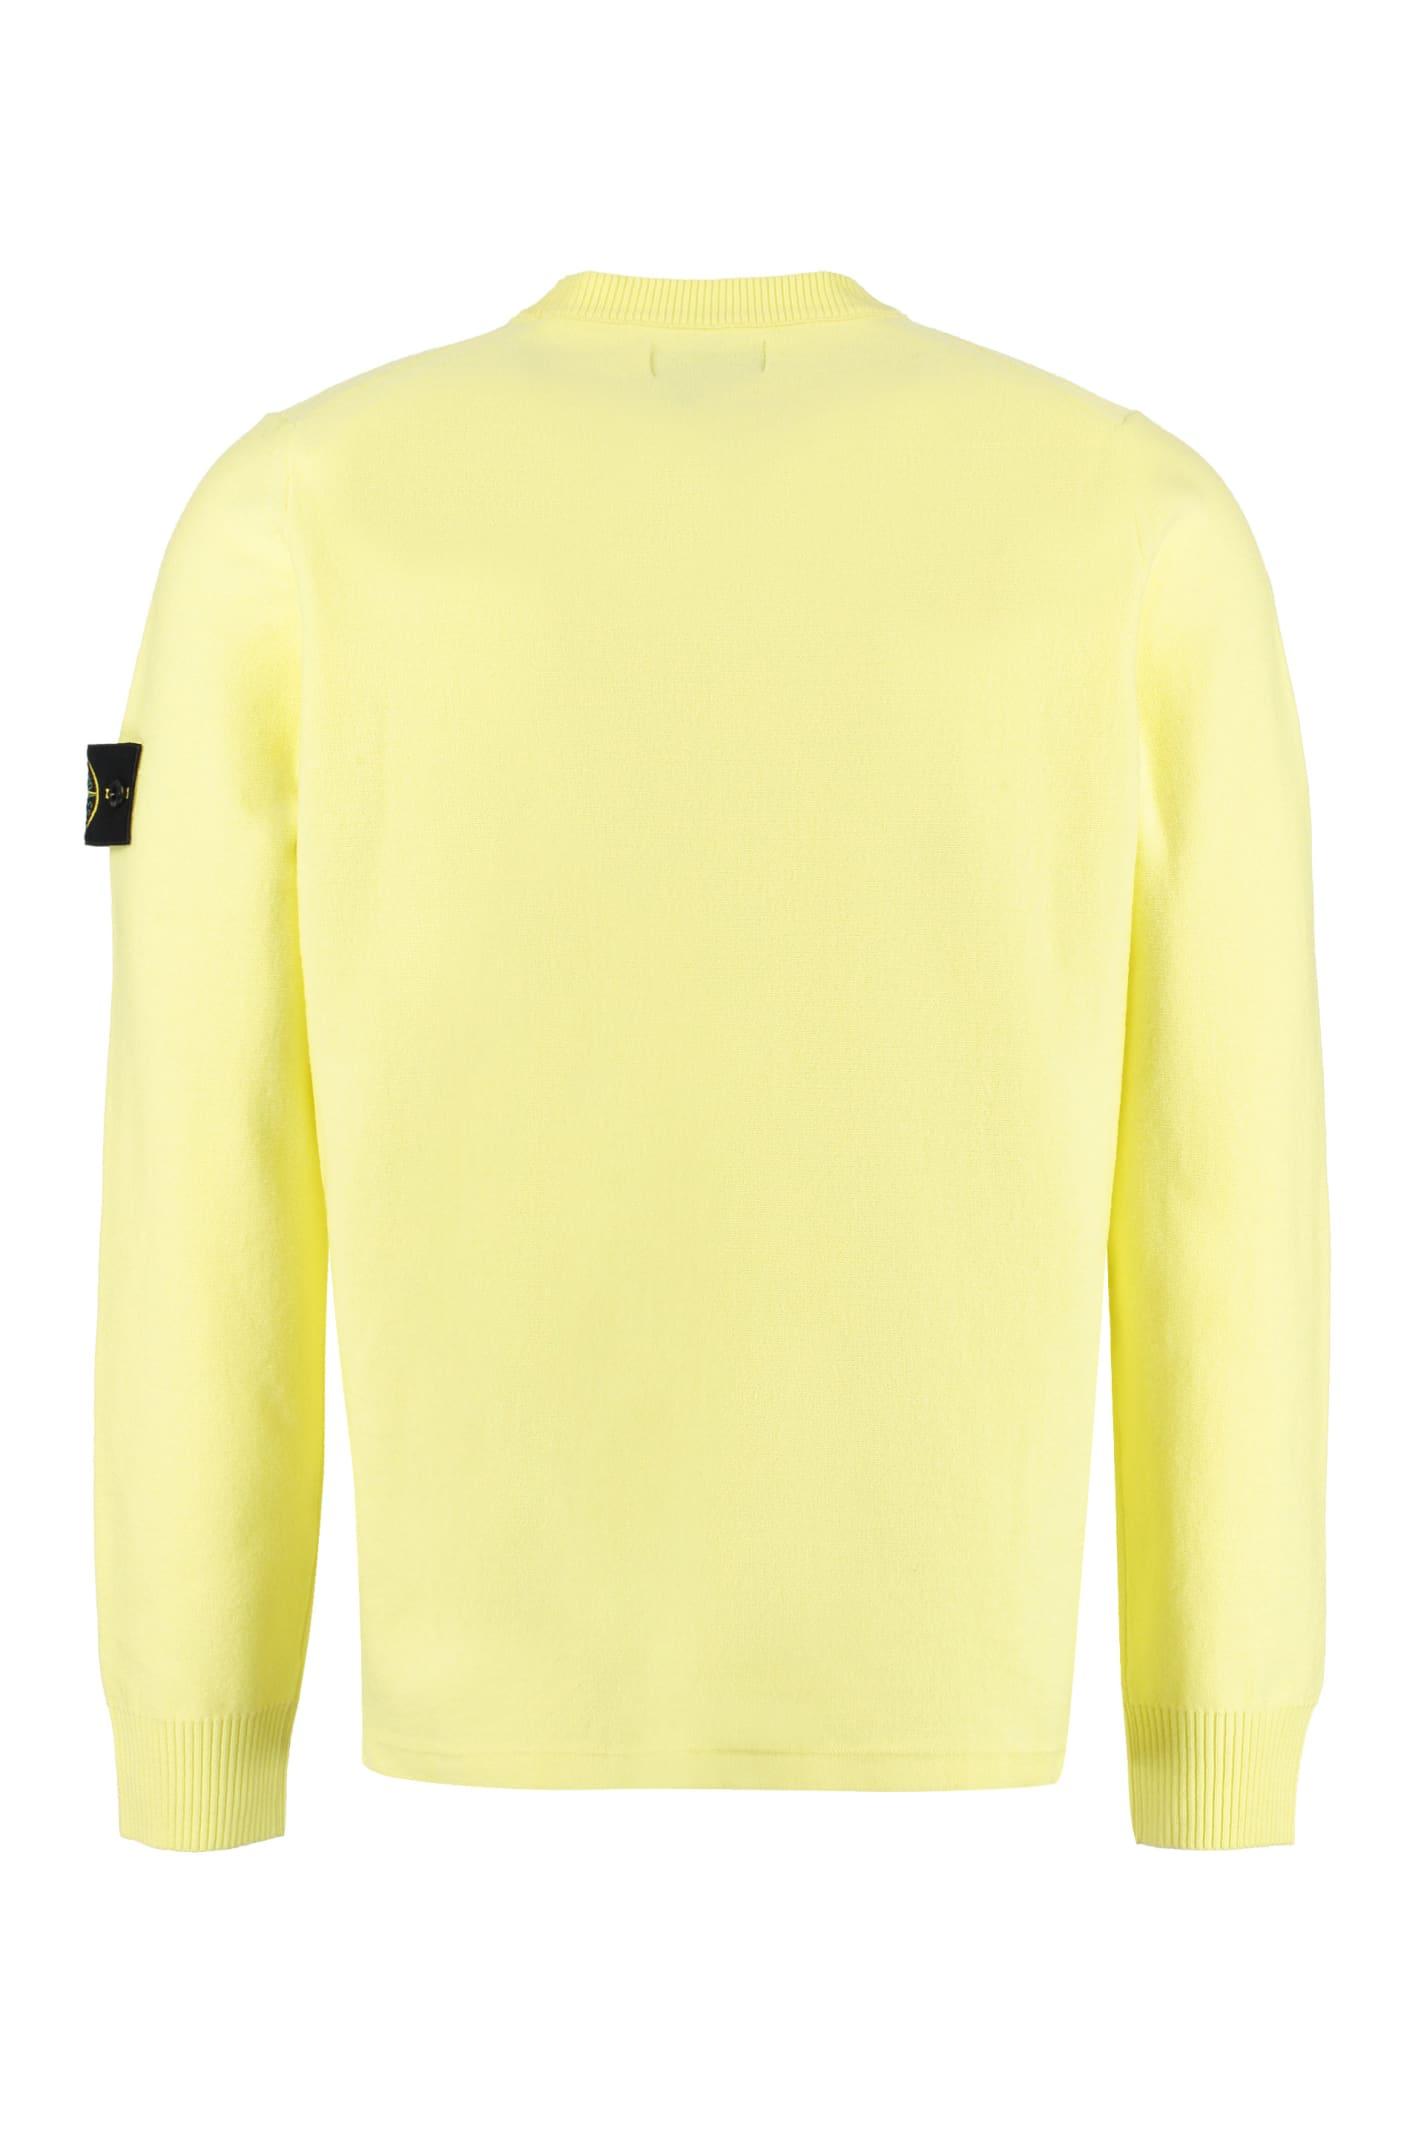 Stone Island Wool-blend Crew-neck Sweater in Yellow for Men | Lyst UK